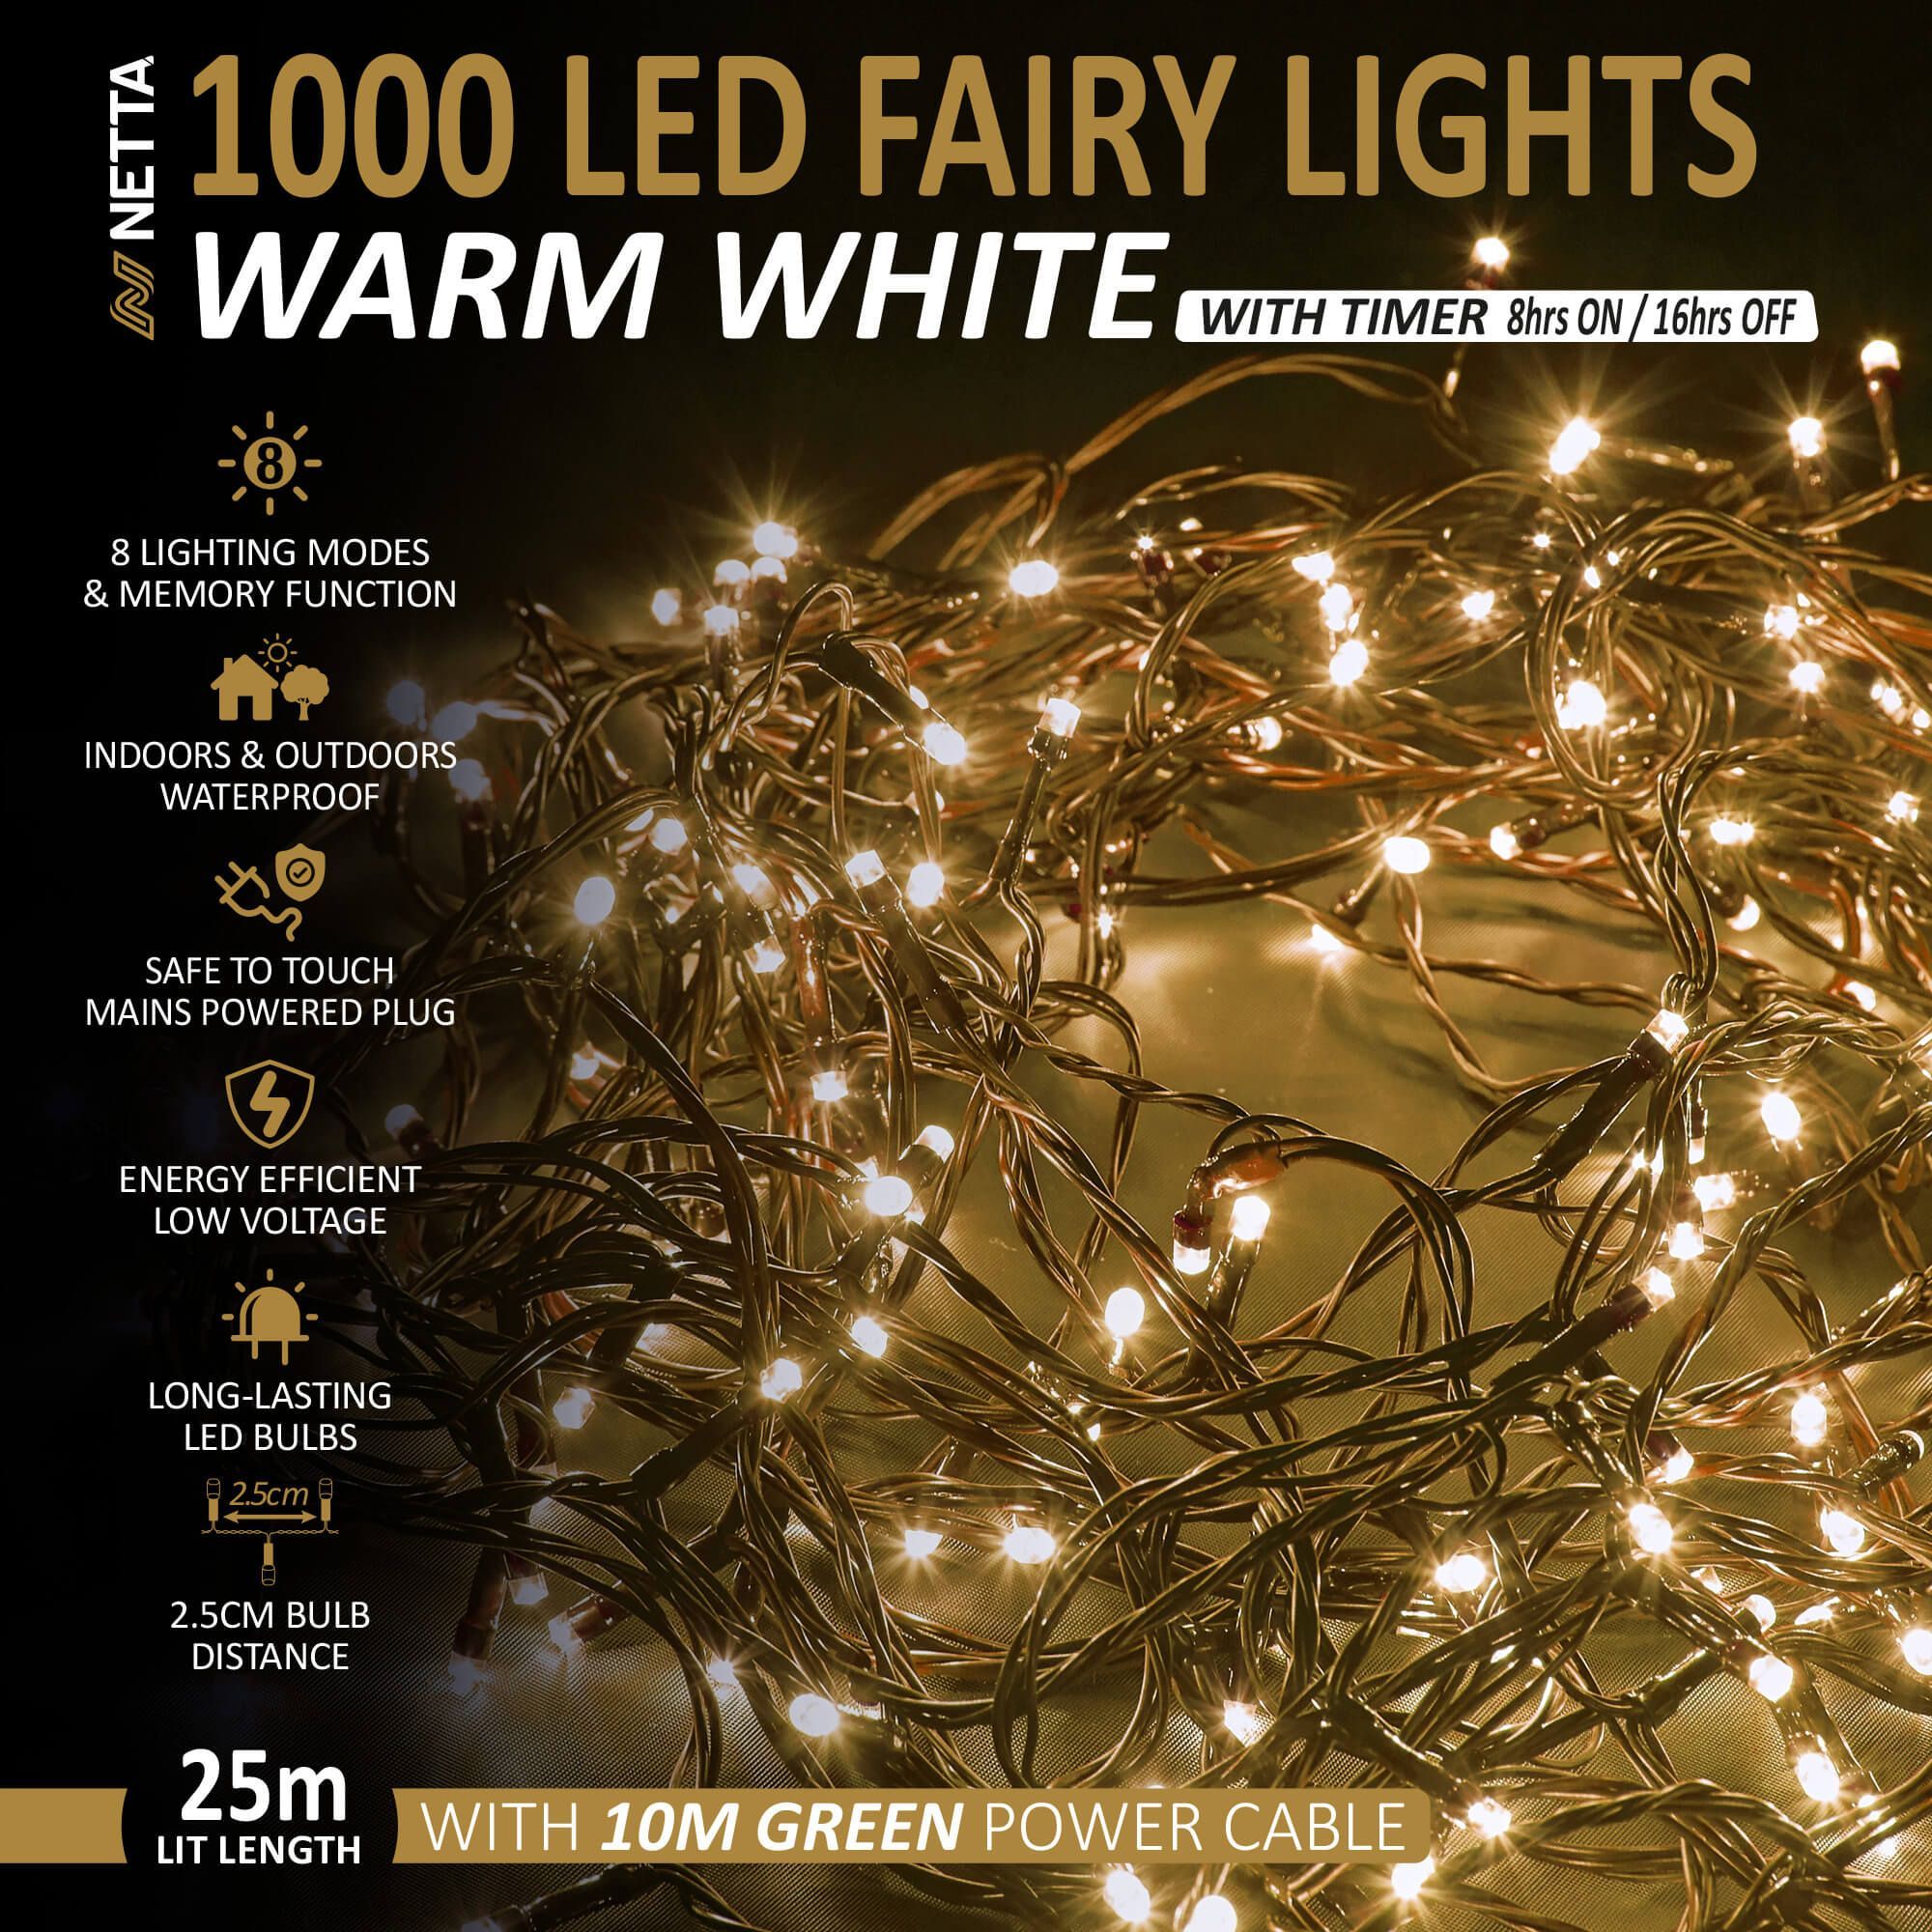 1000 LED Fairy Close-set String Lights 25M Christmas Tree Lights Green Cable - Warm White